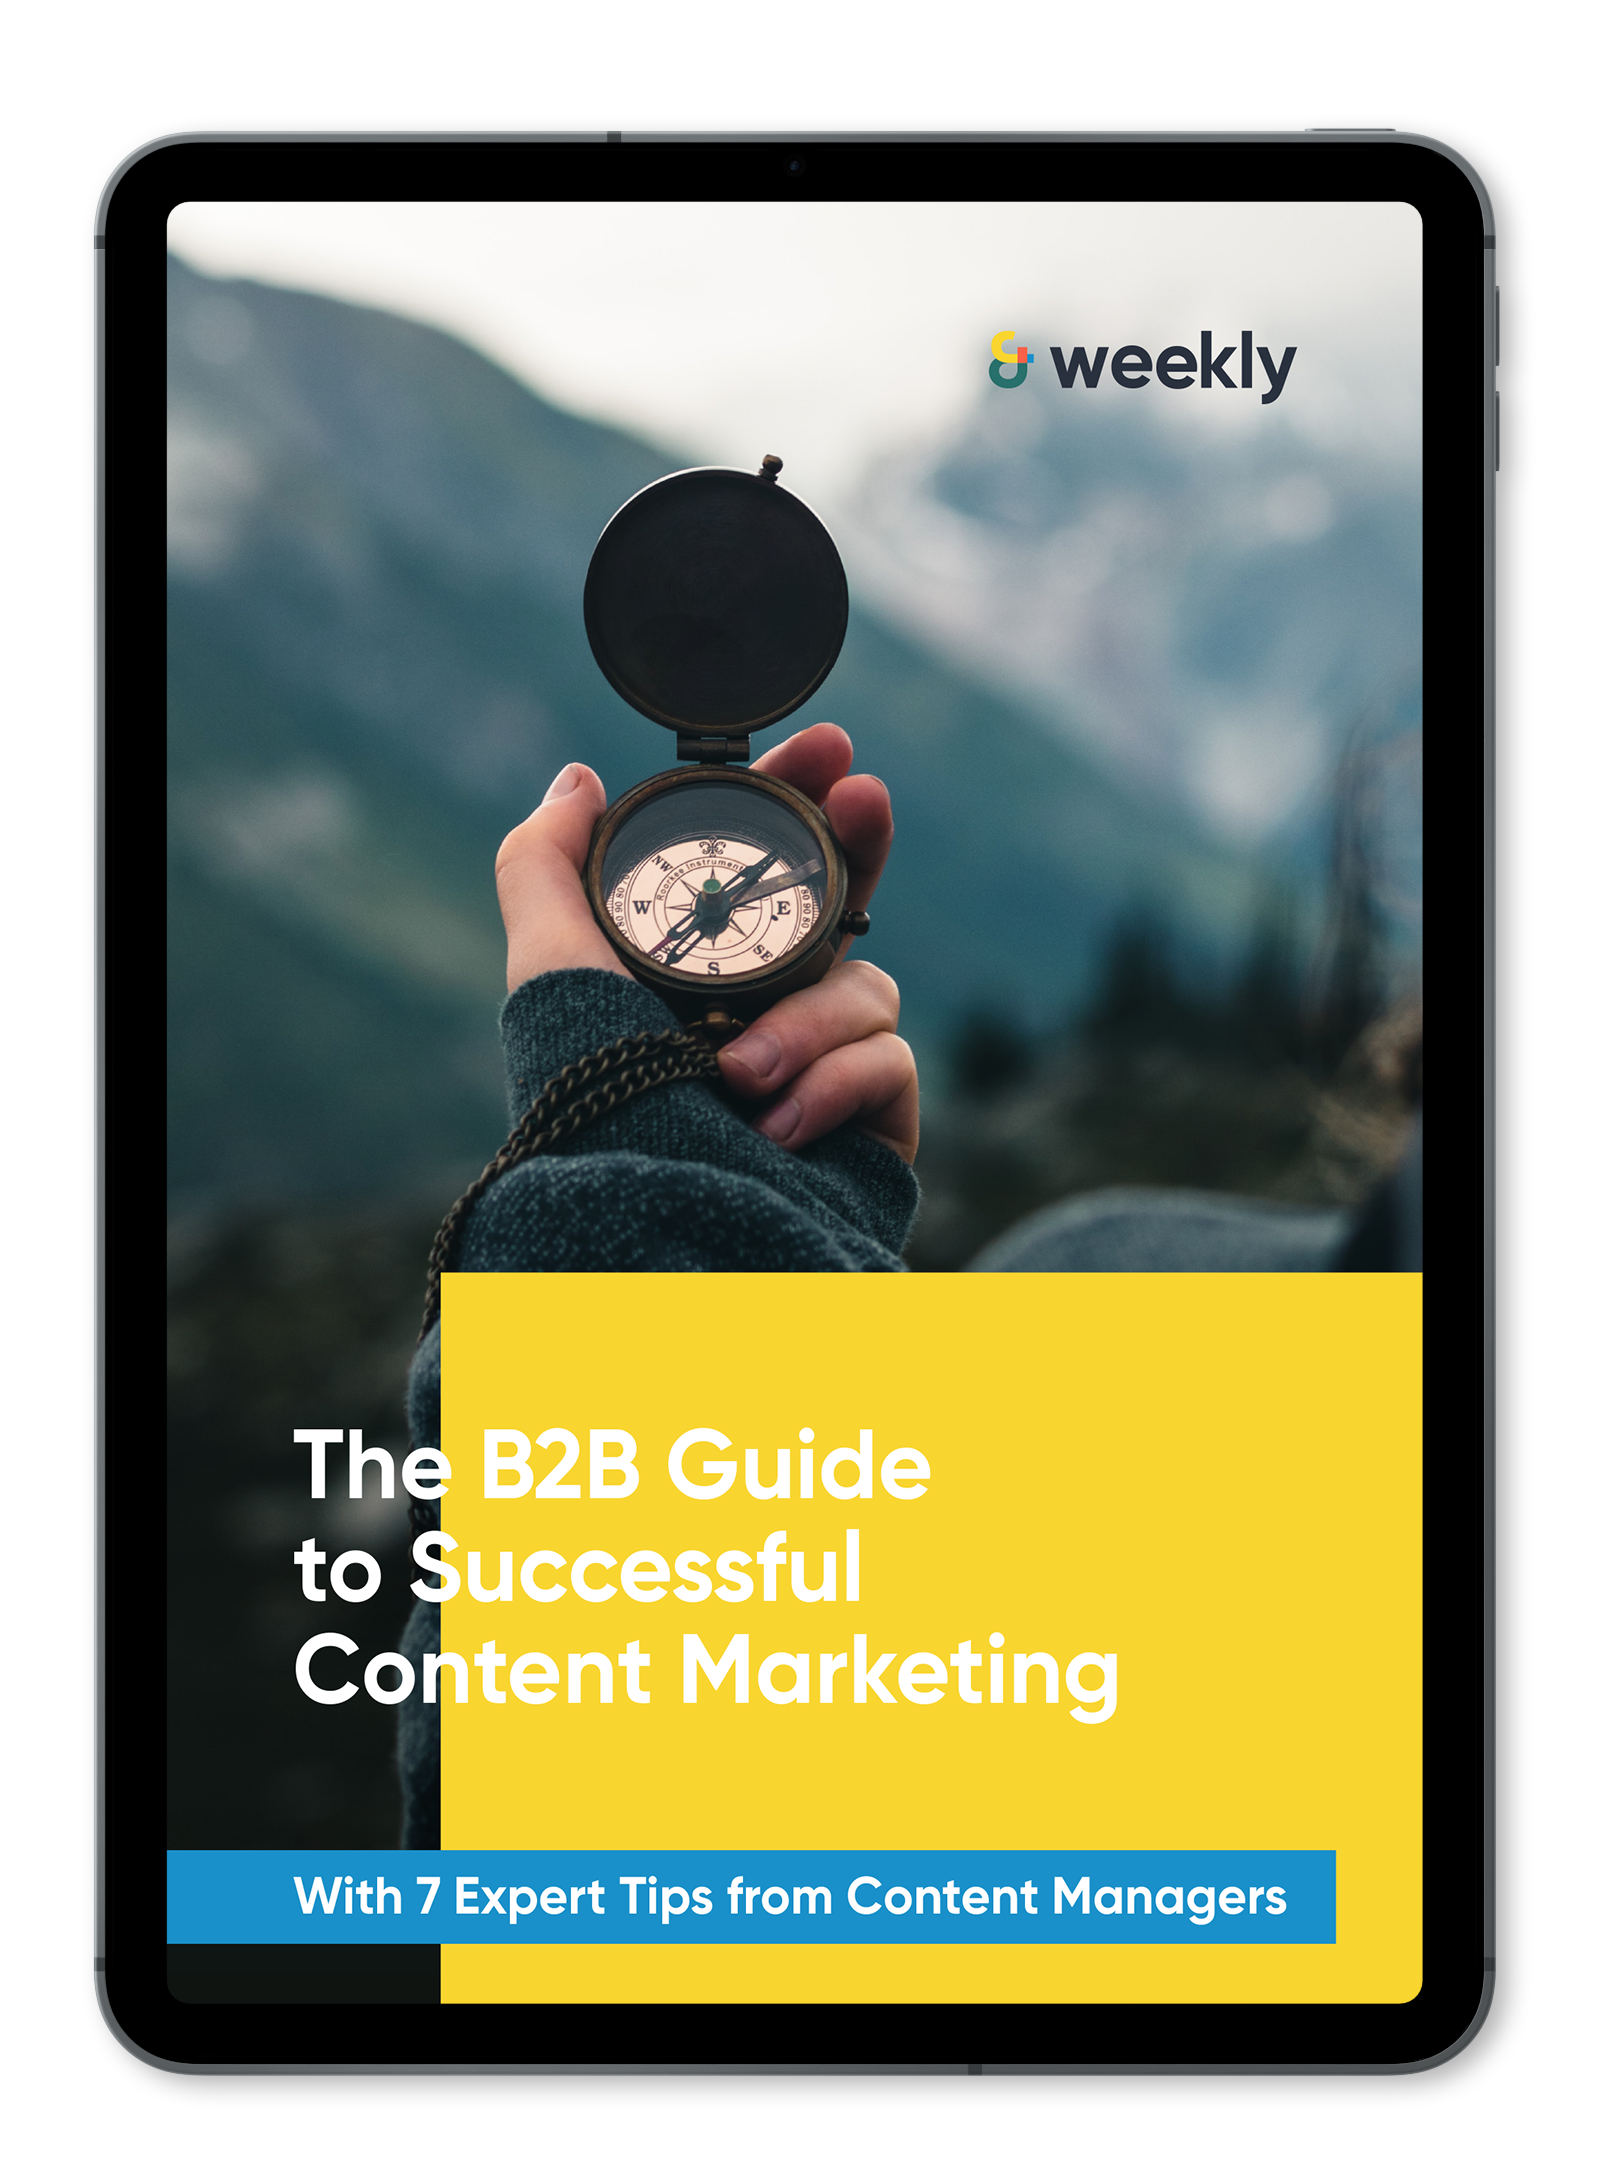 &weekly-Content-Marketing-Guide